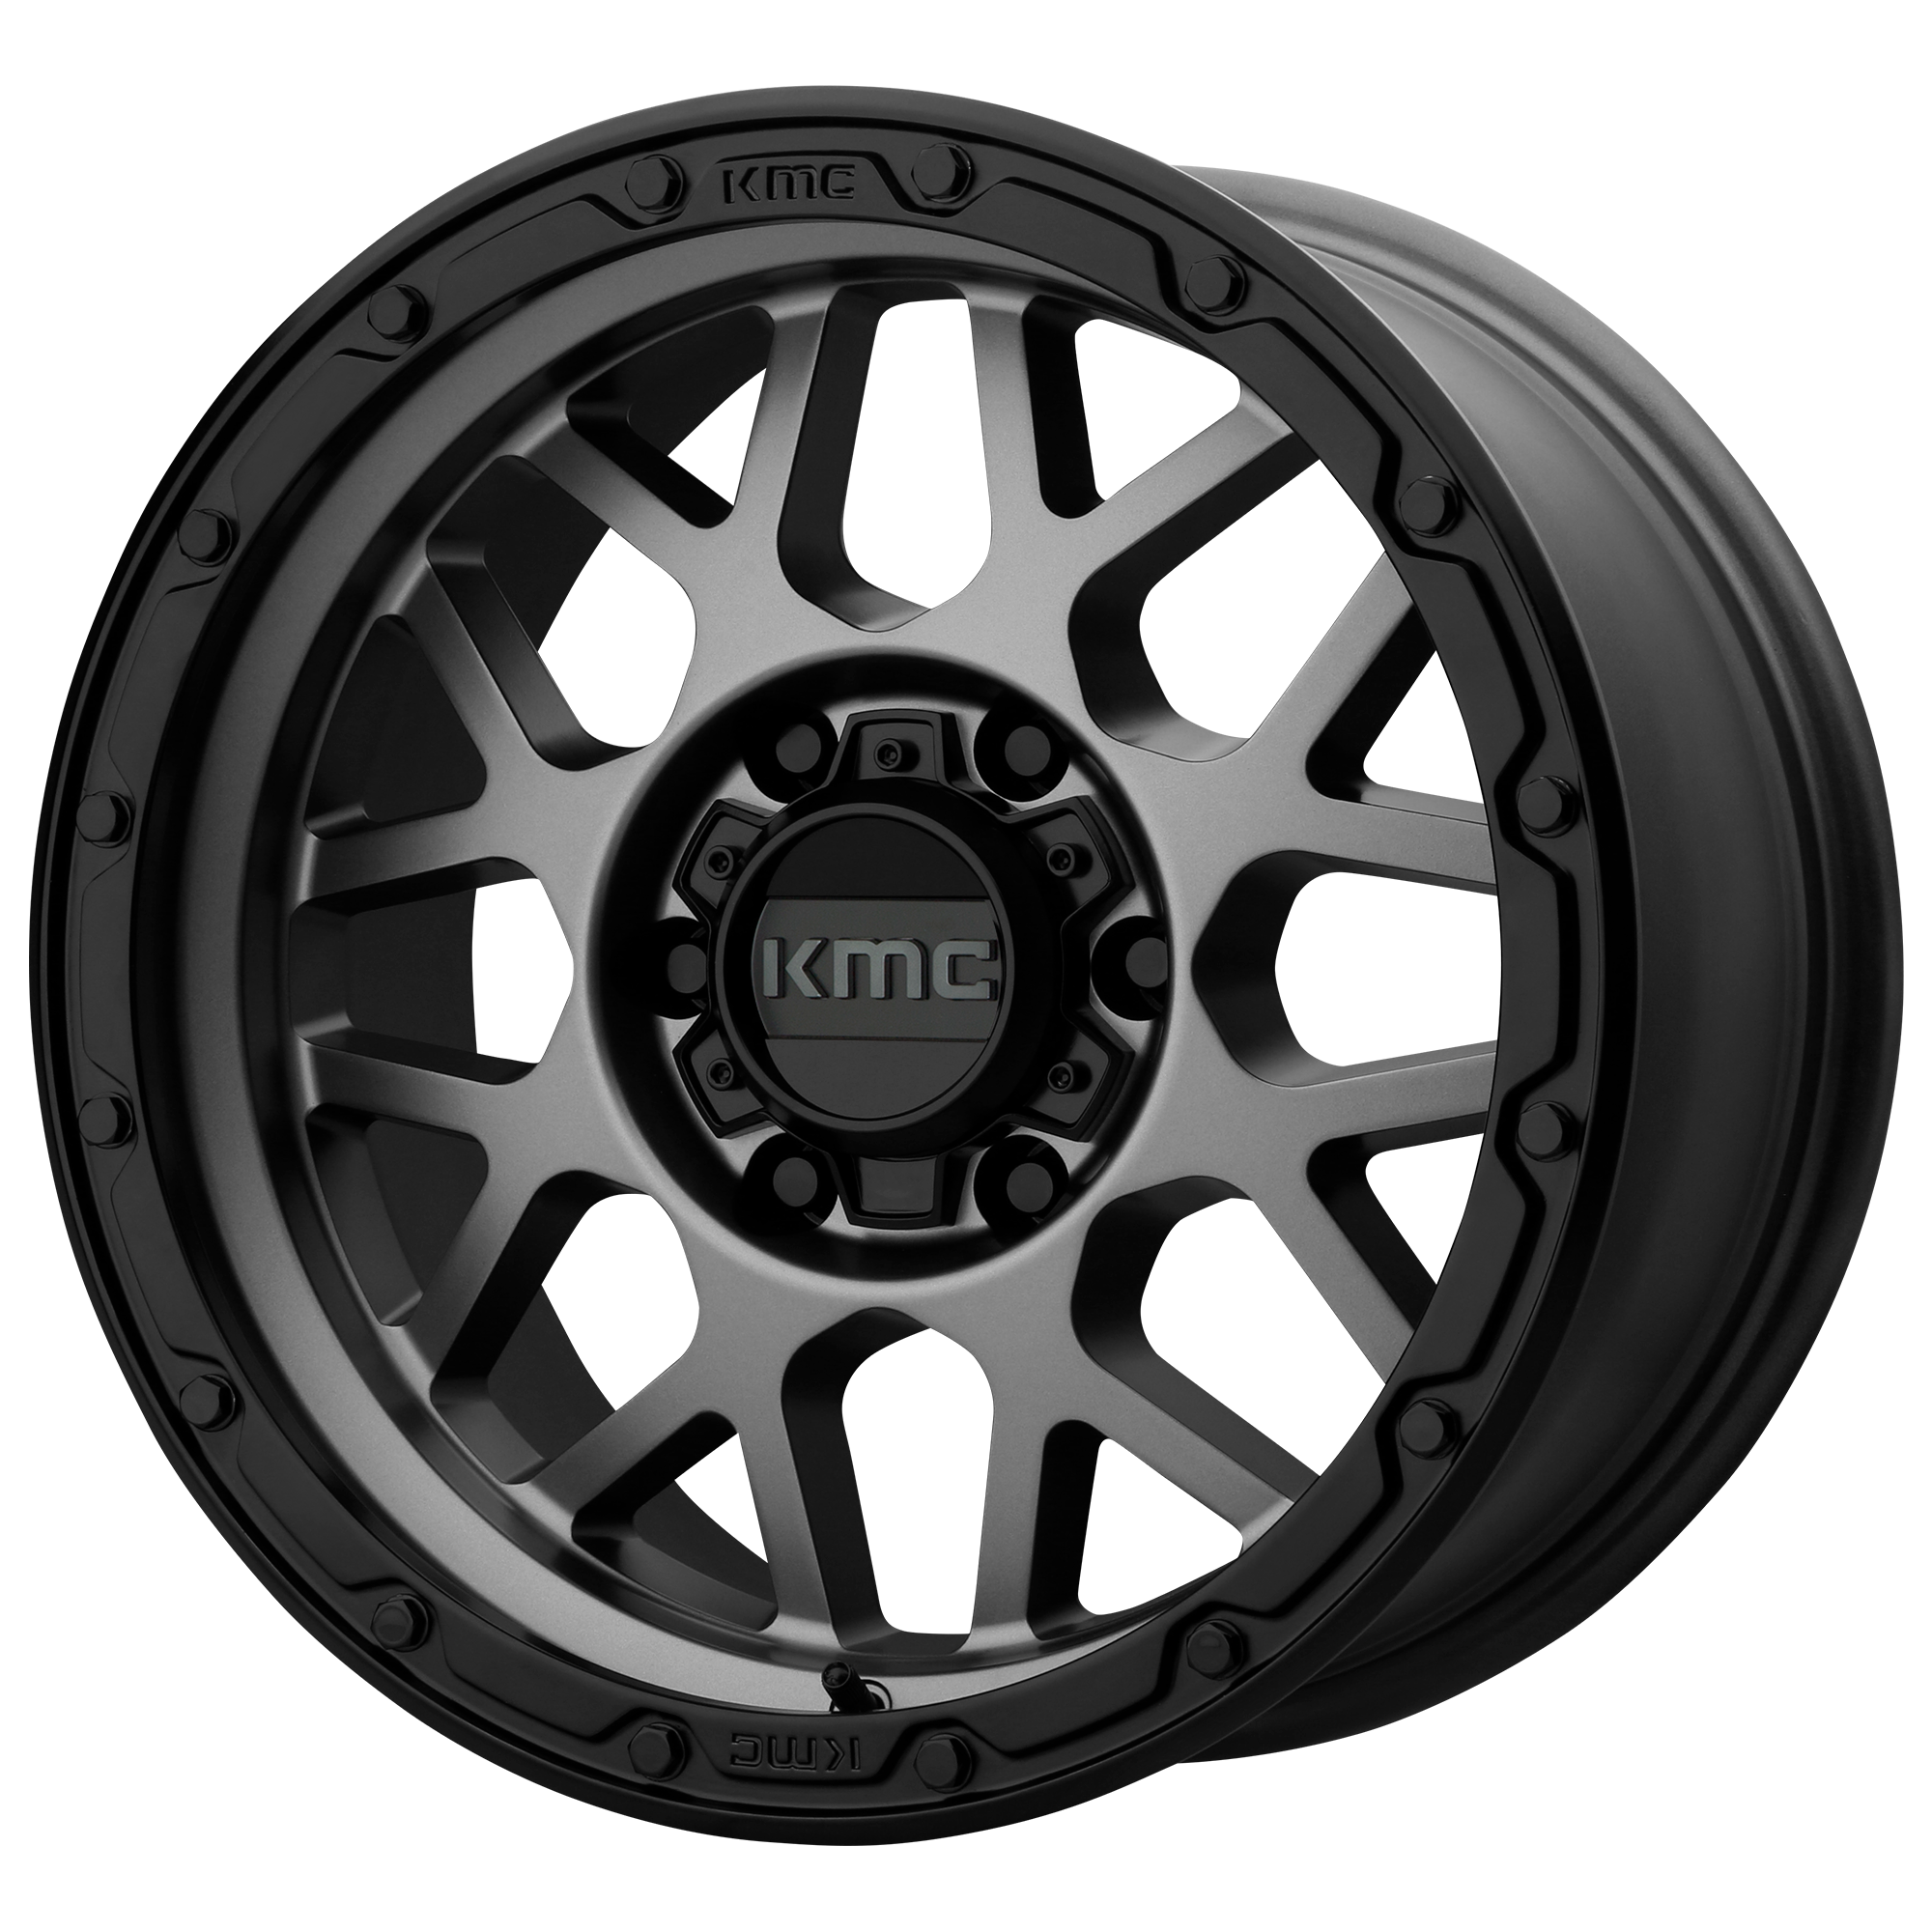 GRENADE OFF-ROAD 20x9 6x139.70 MATTE GRAY W/ MATTE BLACK LIP (18 mm) - Tires and Engine Performance